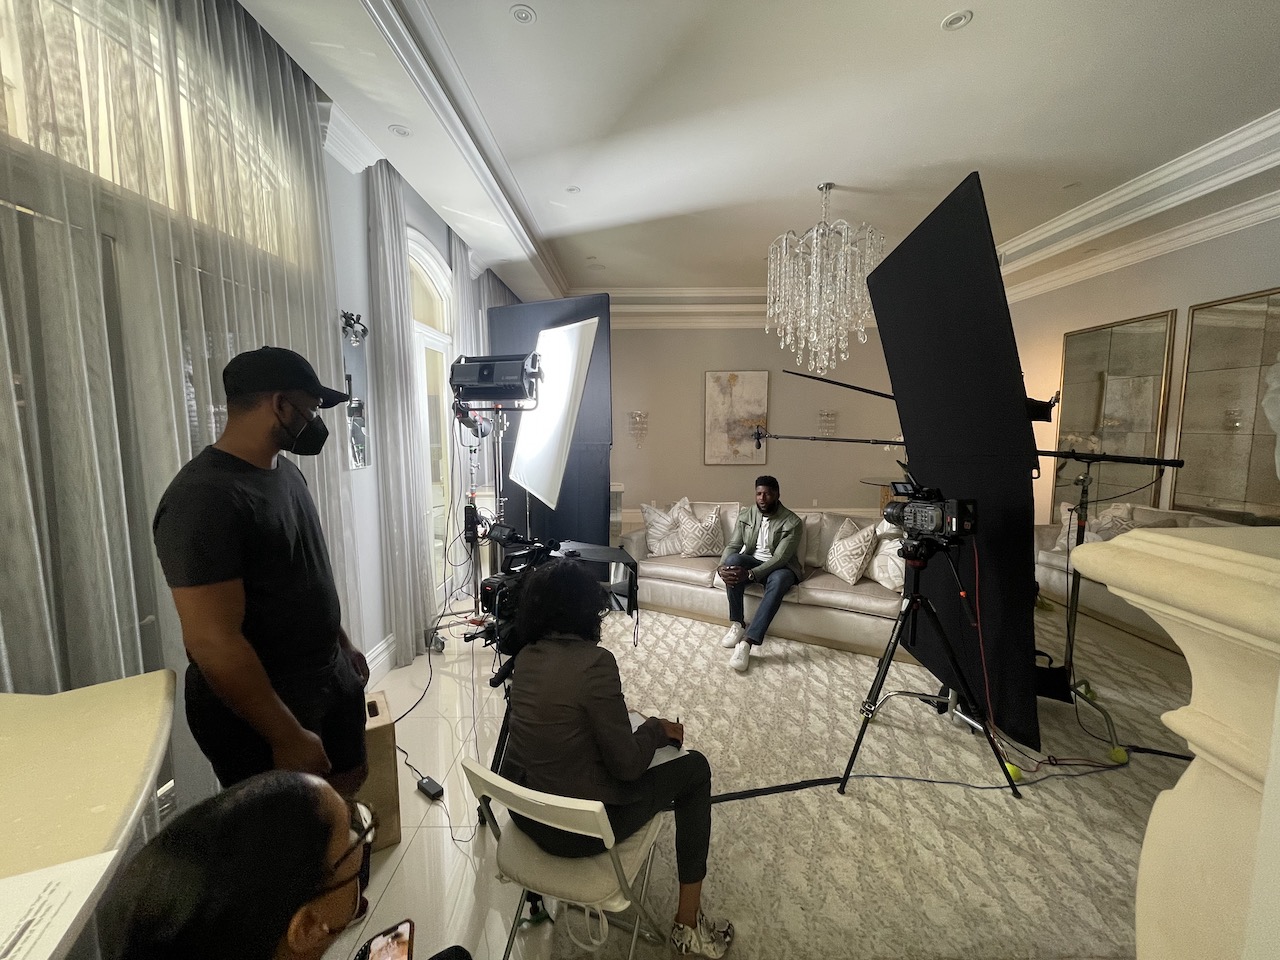 BlackPopBTS Emmanuel Acho by CI Studios with him sitting surrounded by crew with equipment